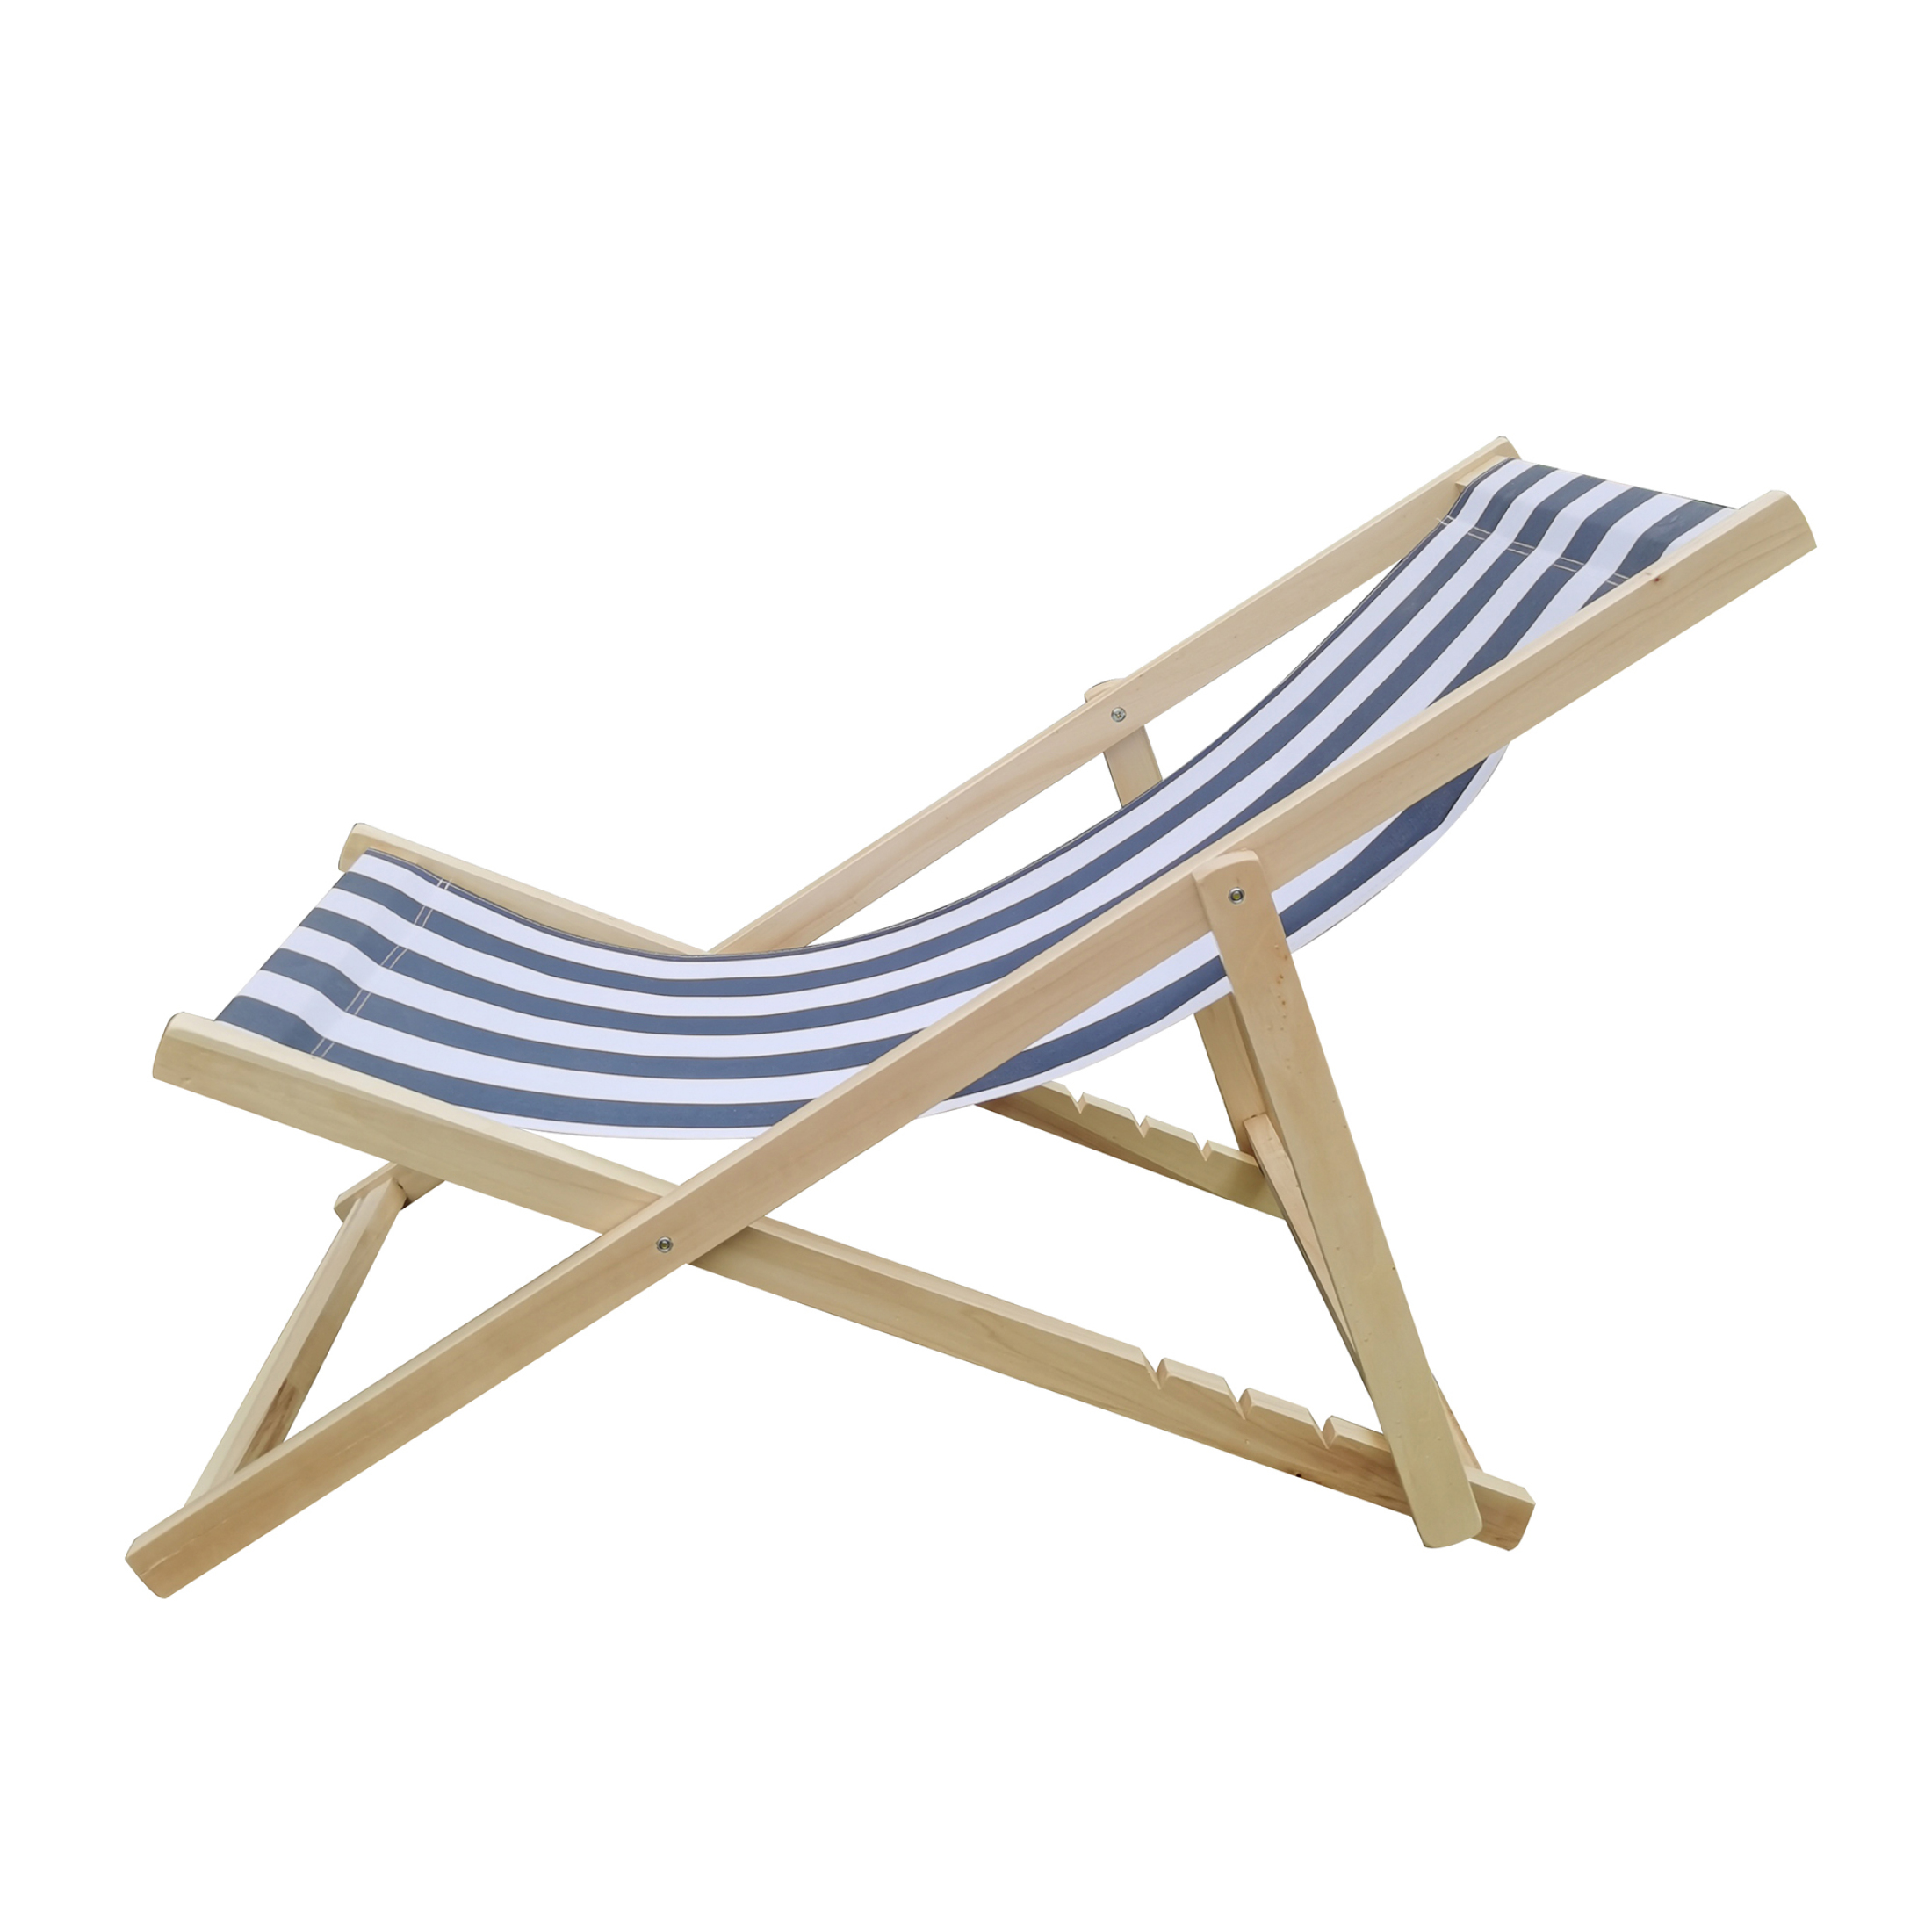 Pouseayar Foldable Sling Chair,Outdoor Beach Chair Chaise Lounge , Gray - image 5 of 8